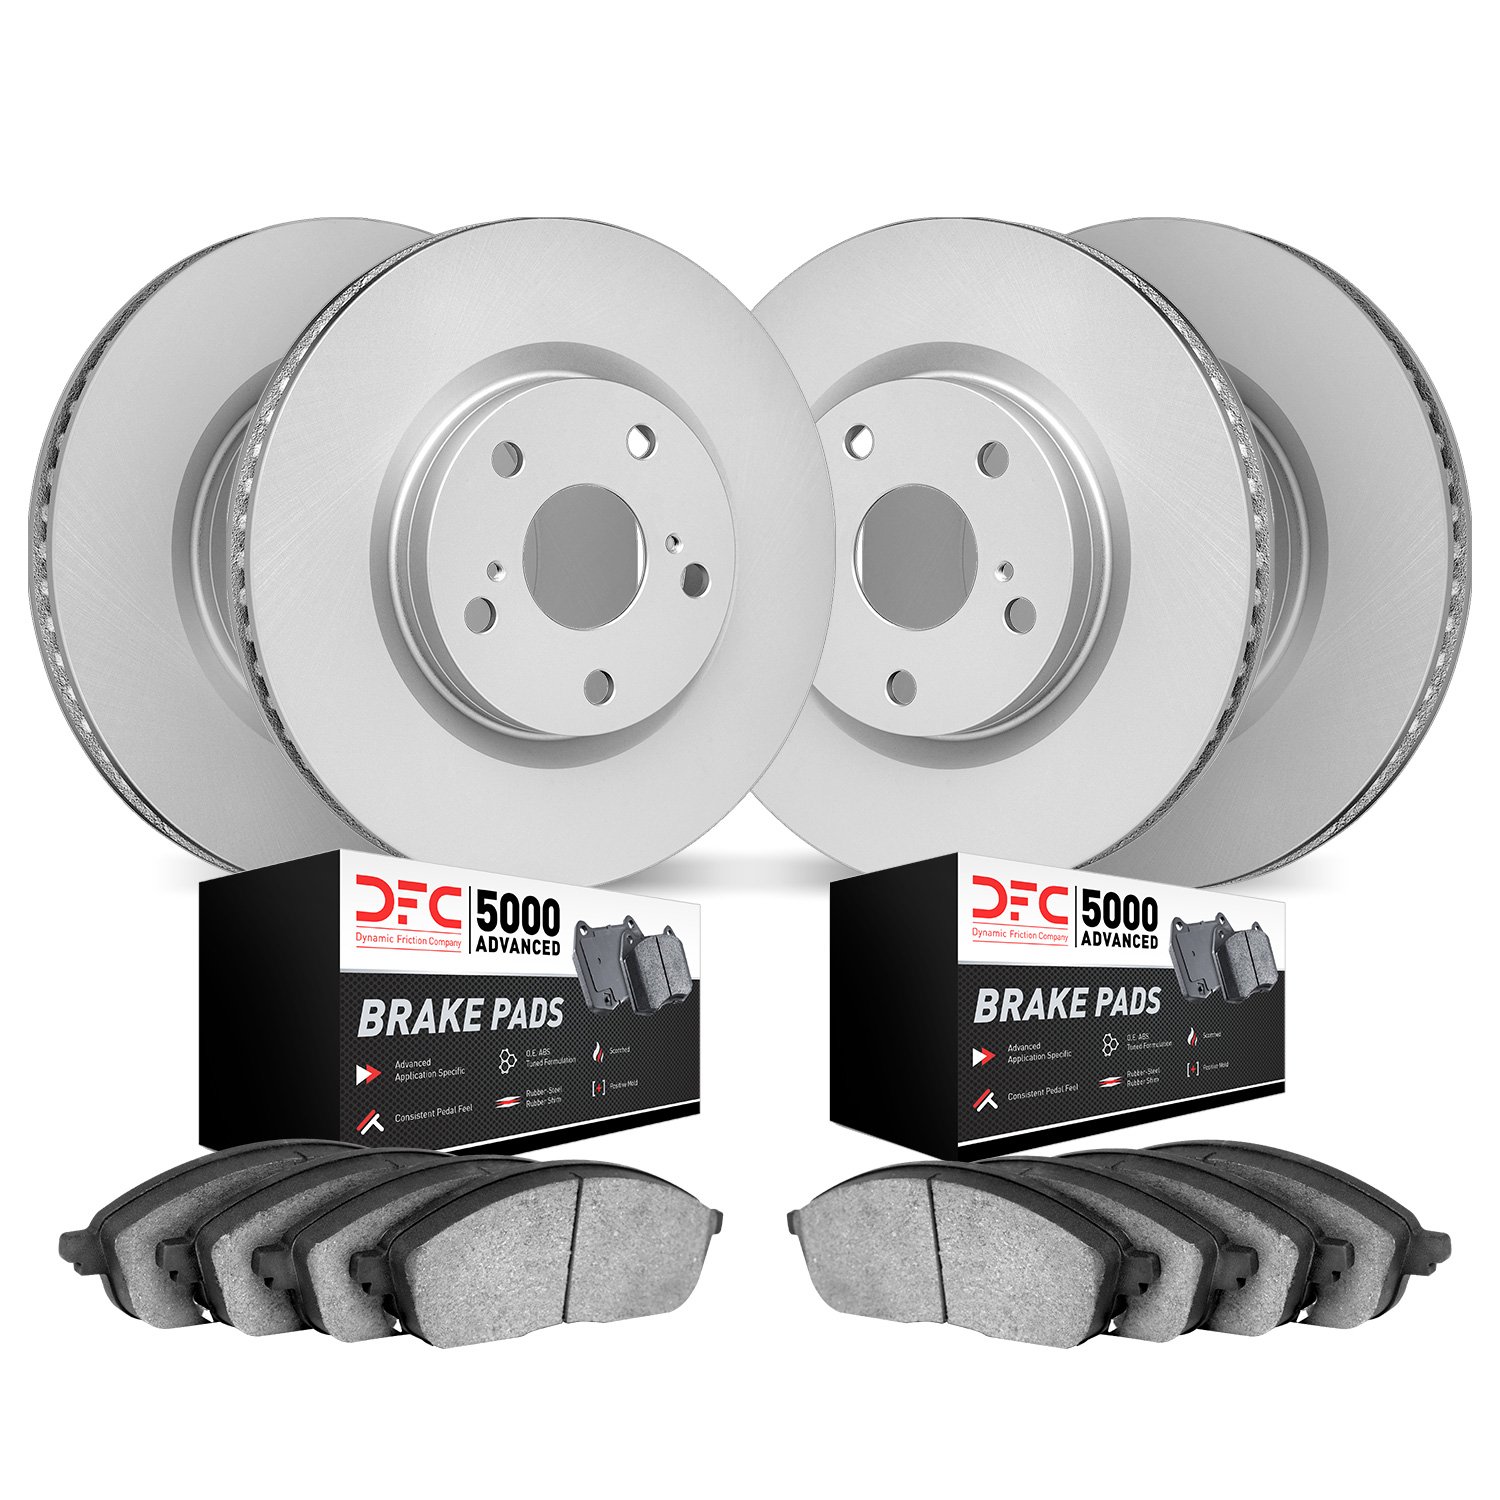 4504-54278 Geospec Brake Rotors w/5000 Advanced Brake Pads Kit, 2013-2019 Ford/Lincoln/Mercury/Mazda, Position: Front and Rear